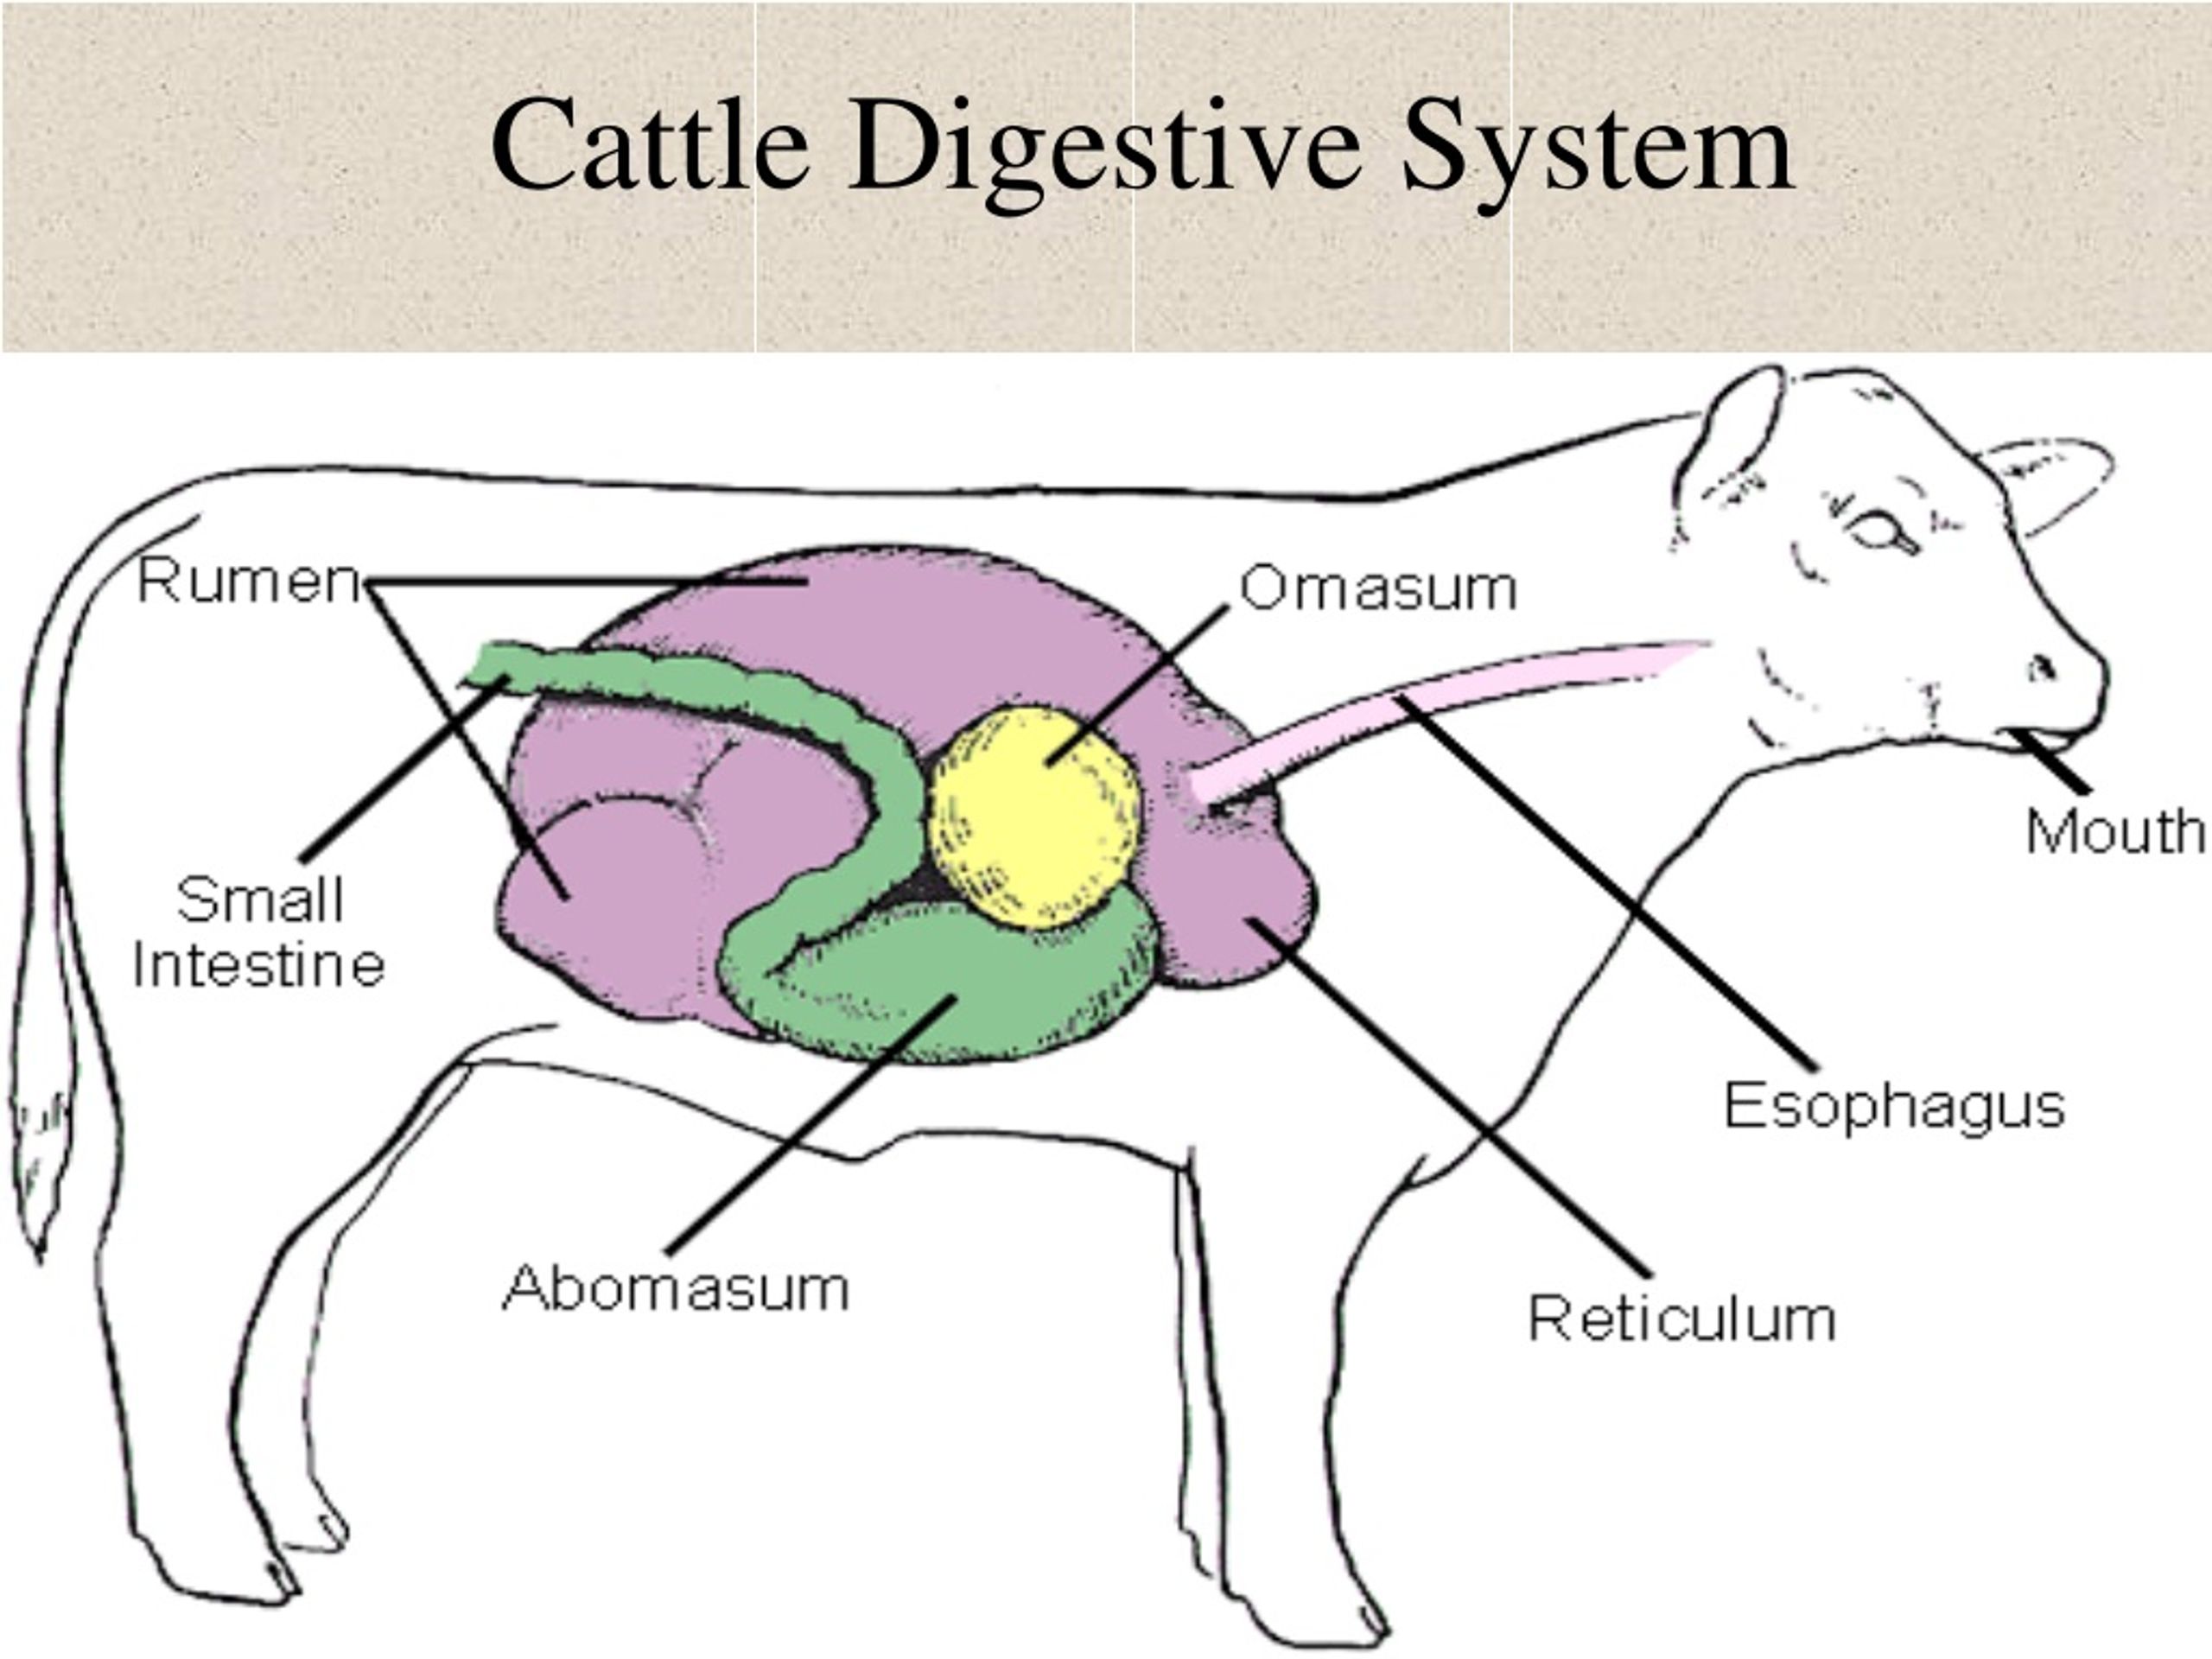 PPT - Animal Science Animal Digestion PowerPoint Presentation, free